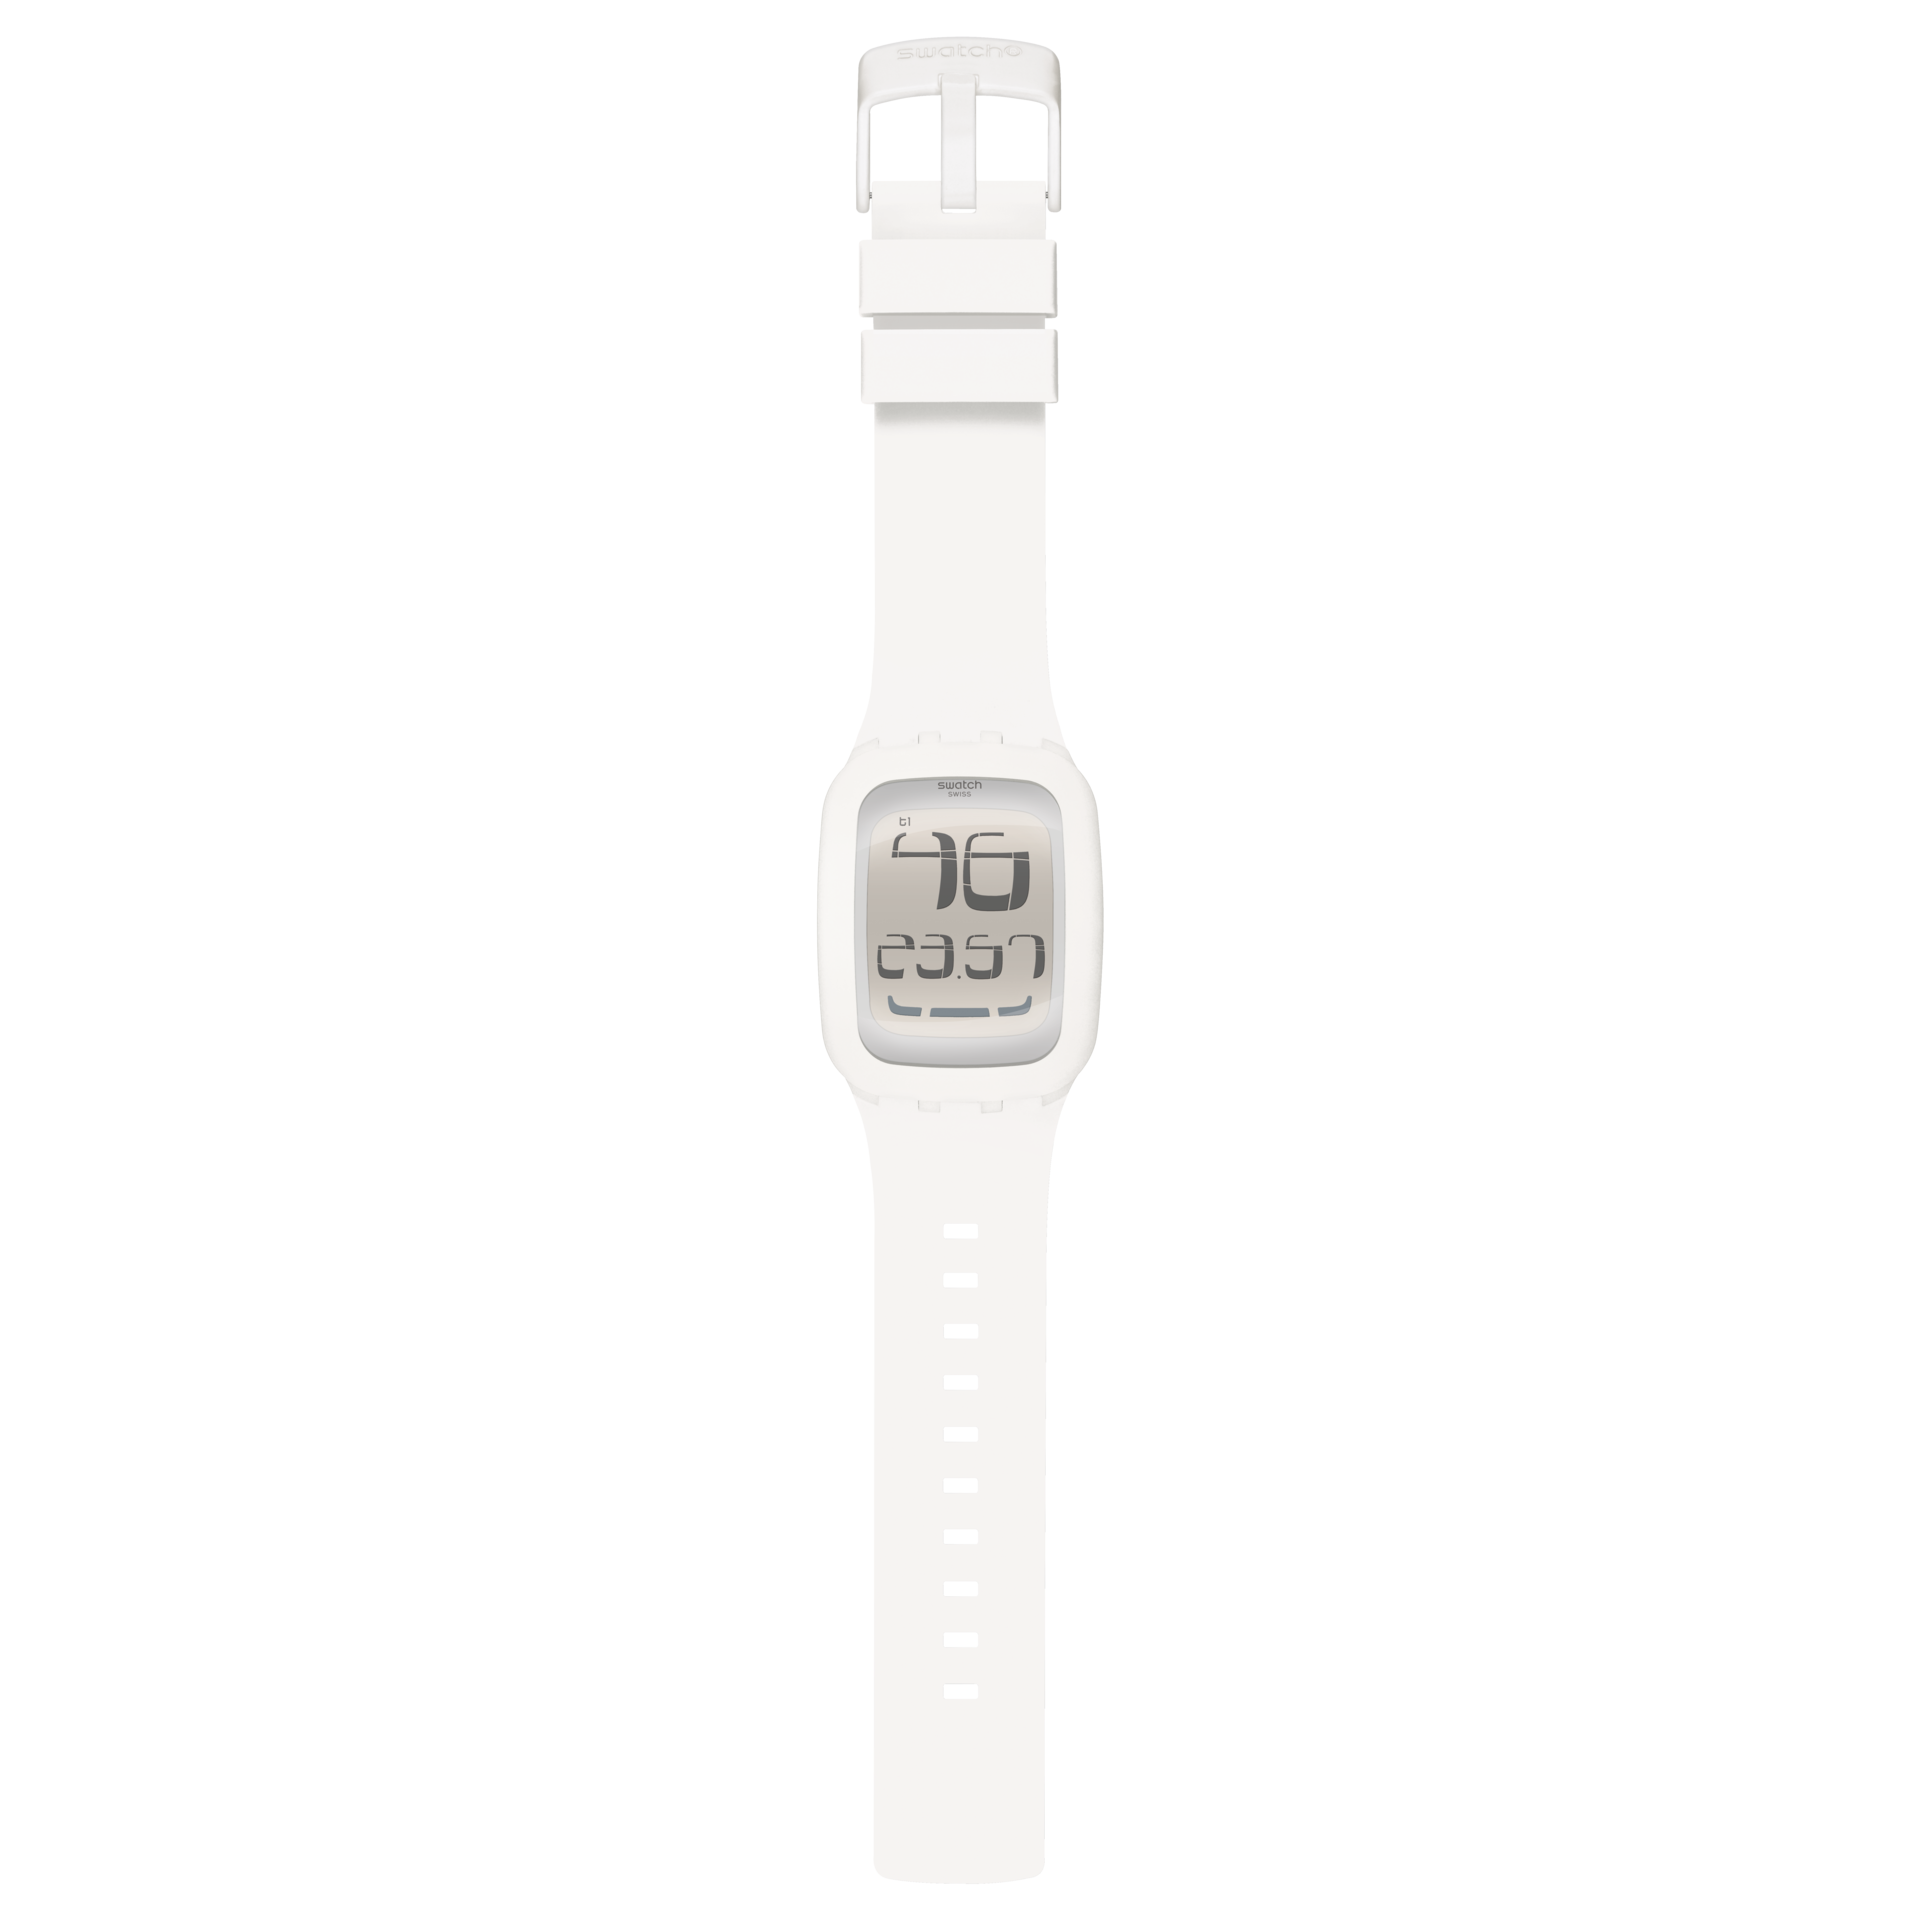 SWATCH TOUCH WHITE